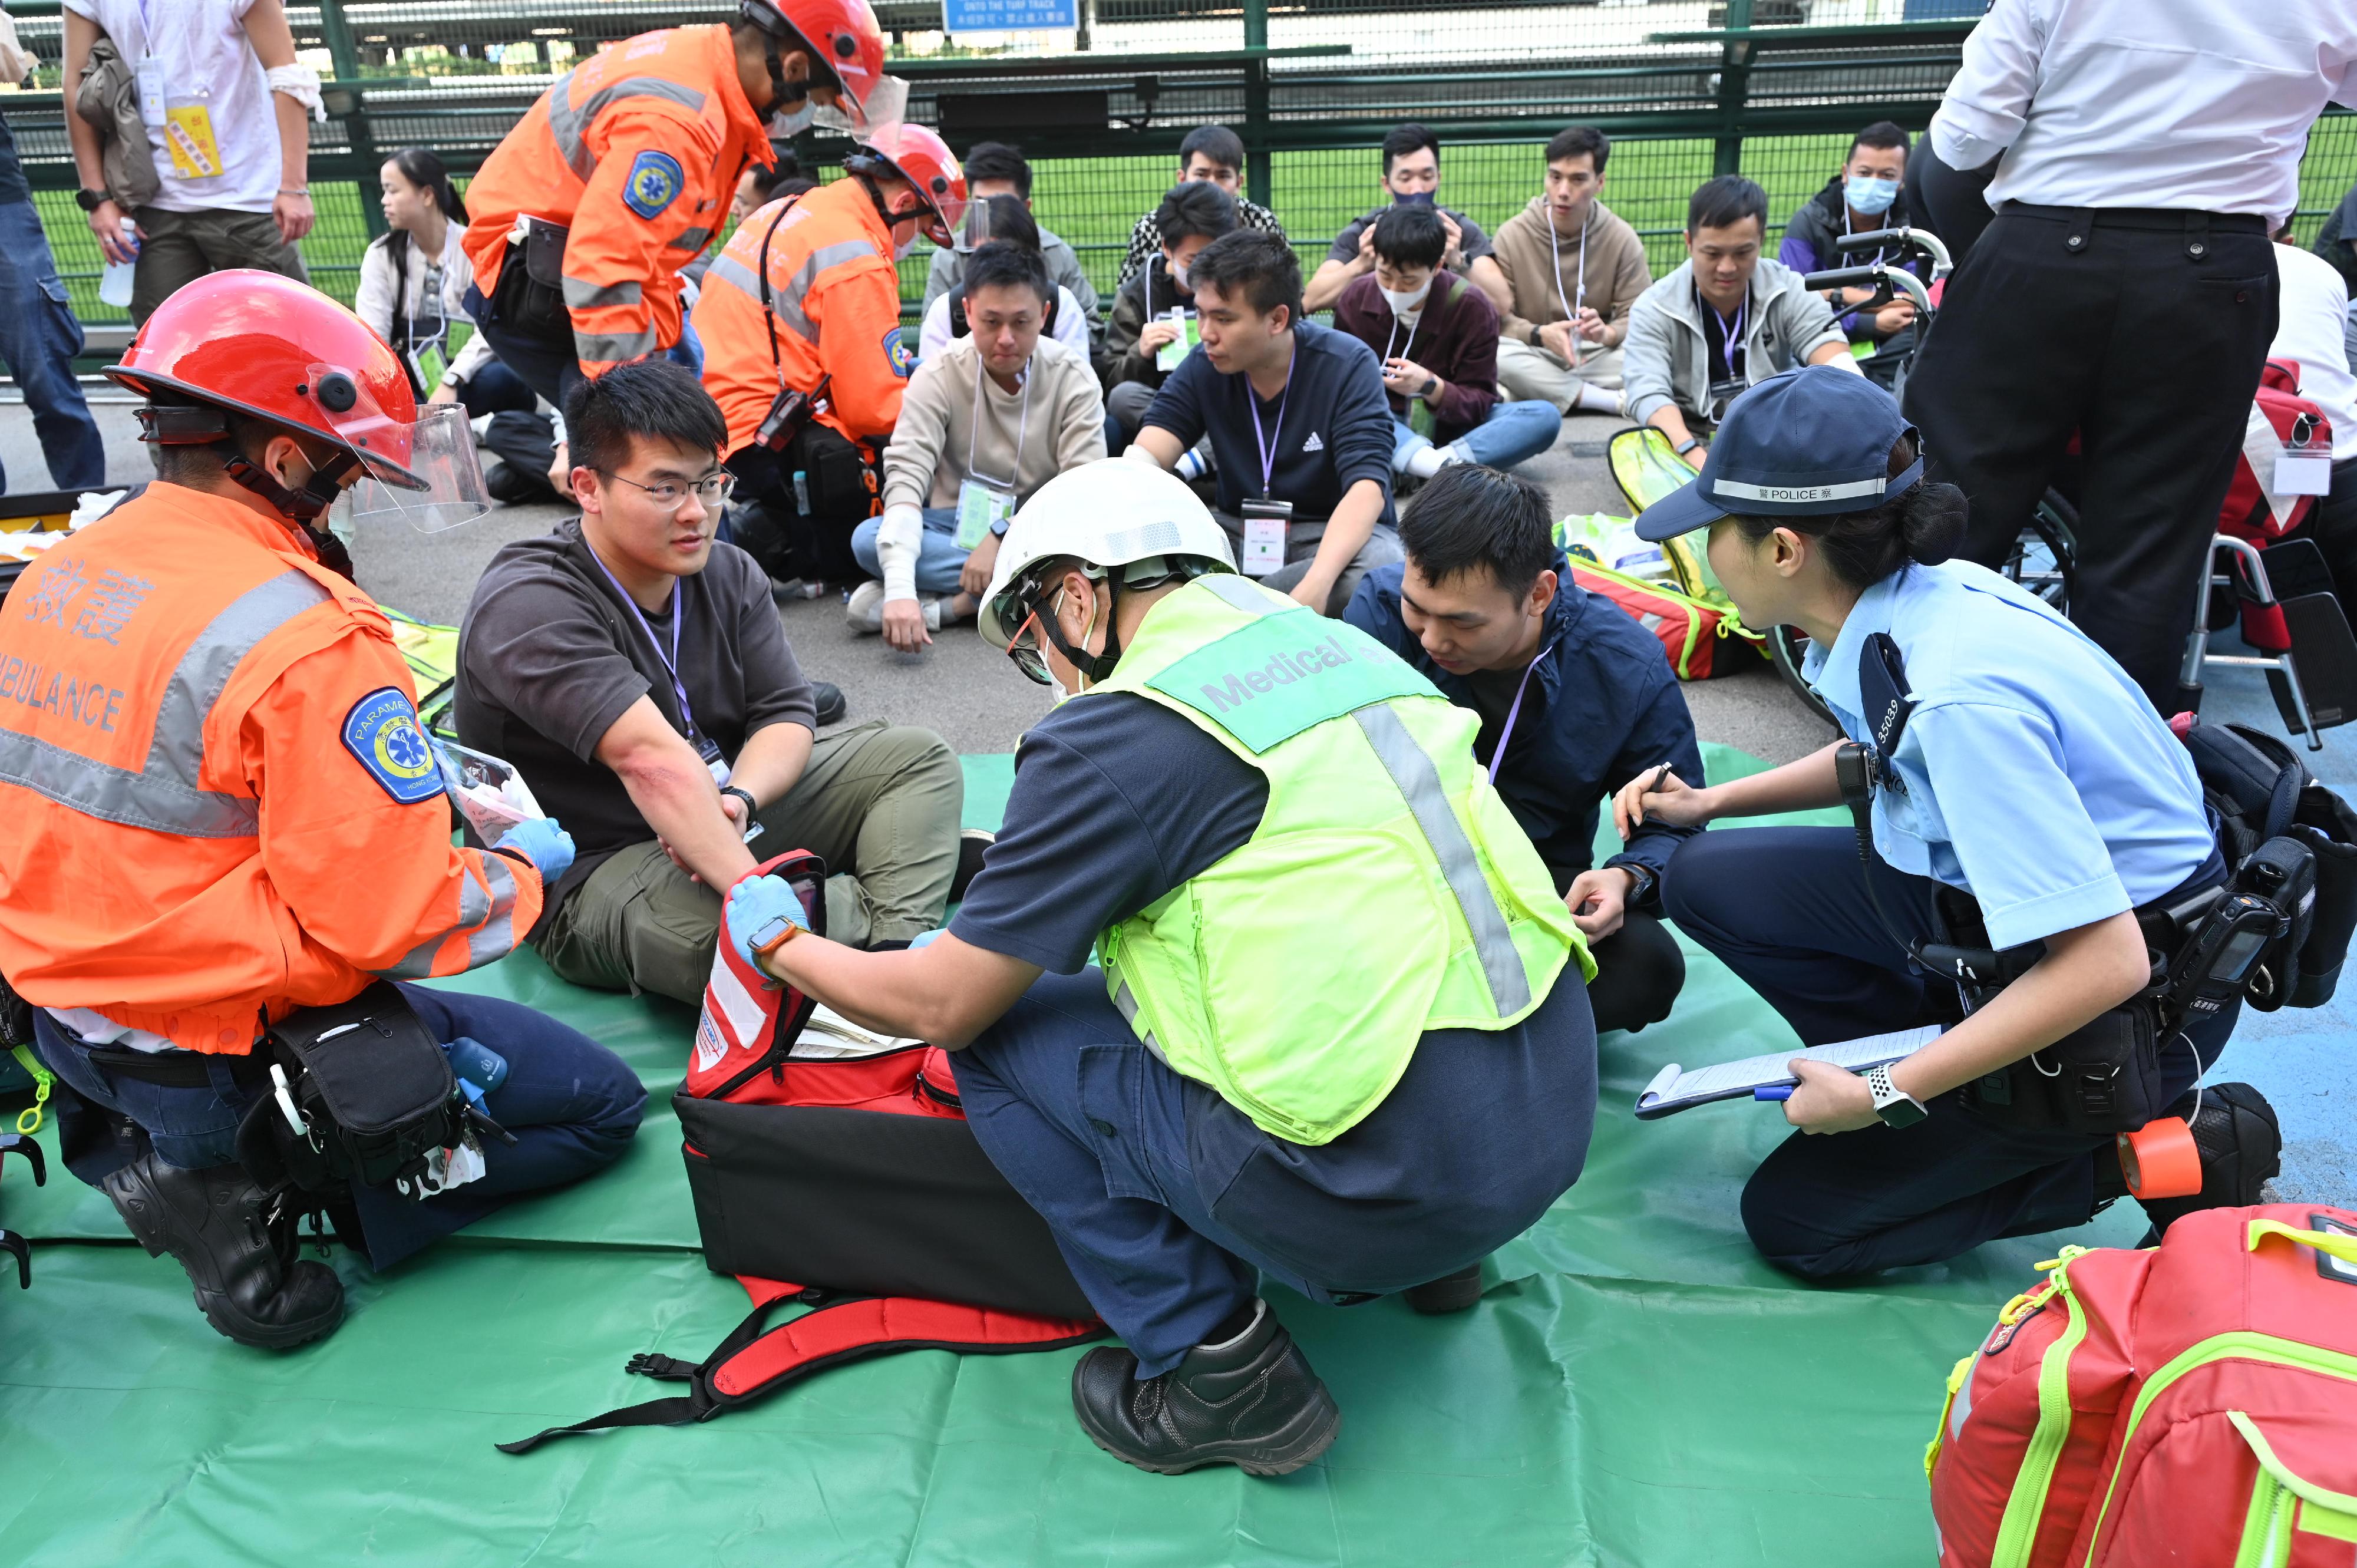 Police Hong Kong Island Regional Headquarters conducted an inter-departmental major incident exercise codenamed "BROKENPIN" with the Fire Services Department, Hospital Authority, Hong Kong Jockey Club, St. John Ambulance Brigade and Hong Kong Association for Conflict and Catastrophe Medicine at Happy Valley Racecourse this afternoon (November 23). Picture shows officers rendering emergency care to the injured.